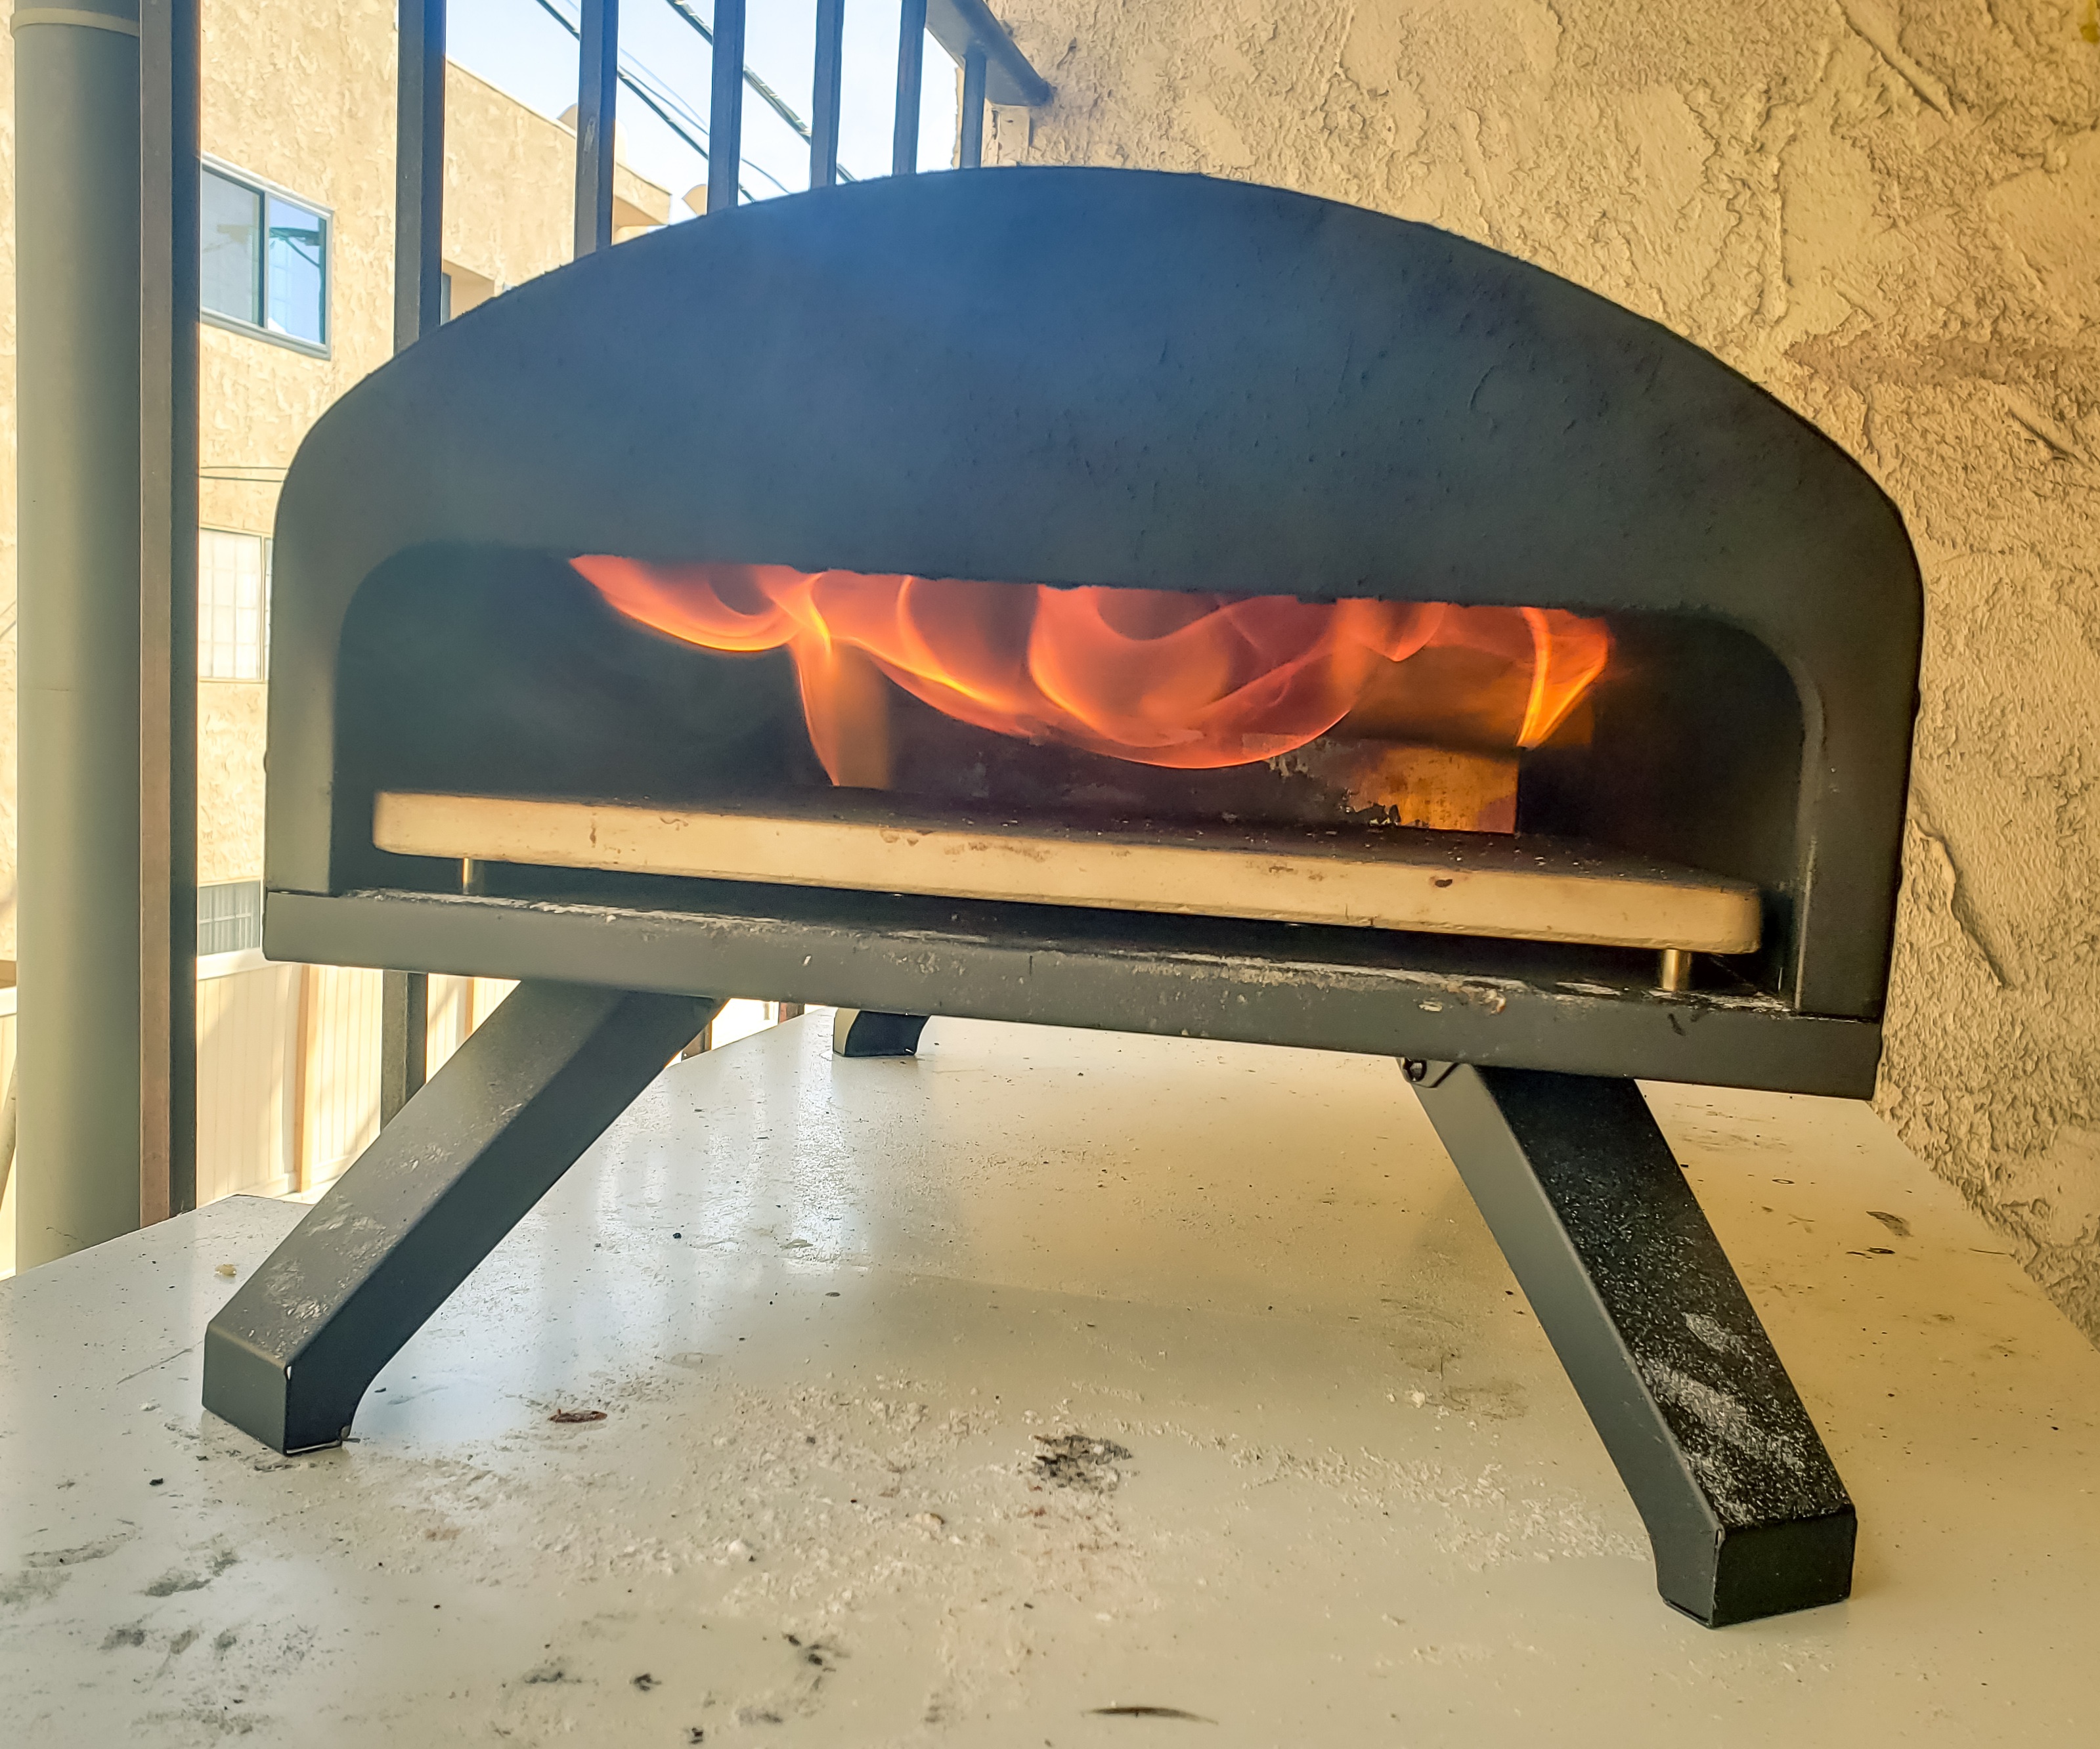 Wood fired pizza oven, roaring flames, bartello pizza oven